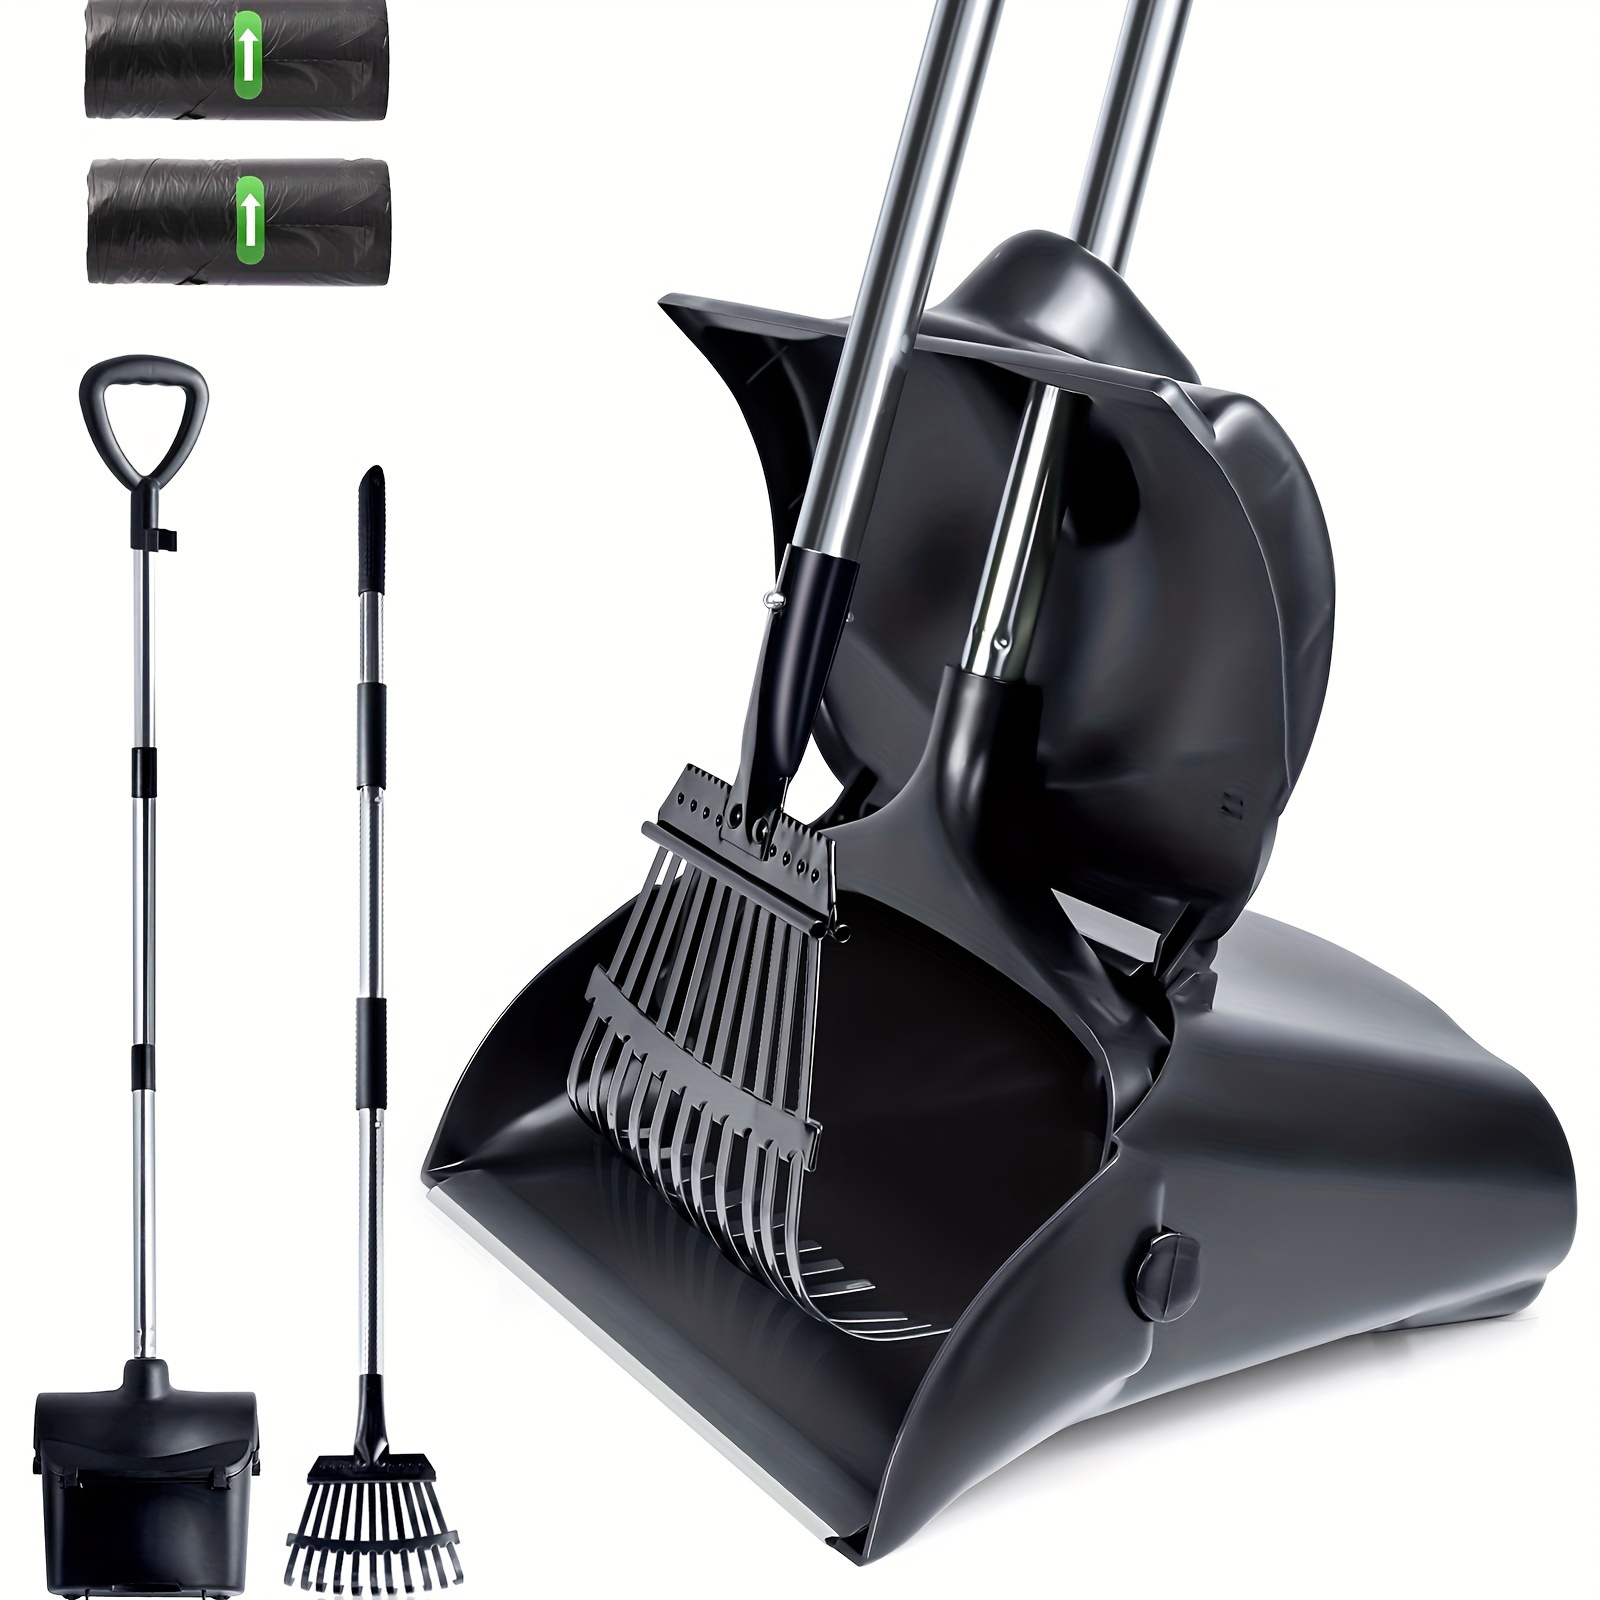 

Pooper Scooper - 36" Long Adjustable Metal Handle Dog Pooper Scooper Swivel Bin & Rake & Spade With 30 Bags Attachment, Easy To Clean Pet Waste Use On Grass, Dirt, Gravel Or Flats